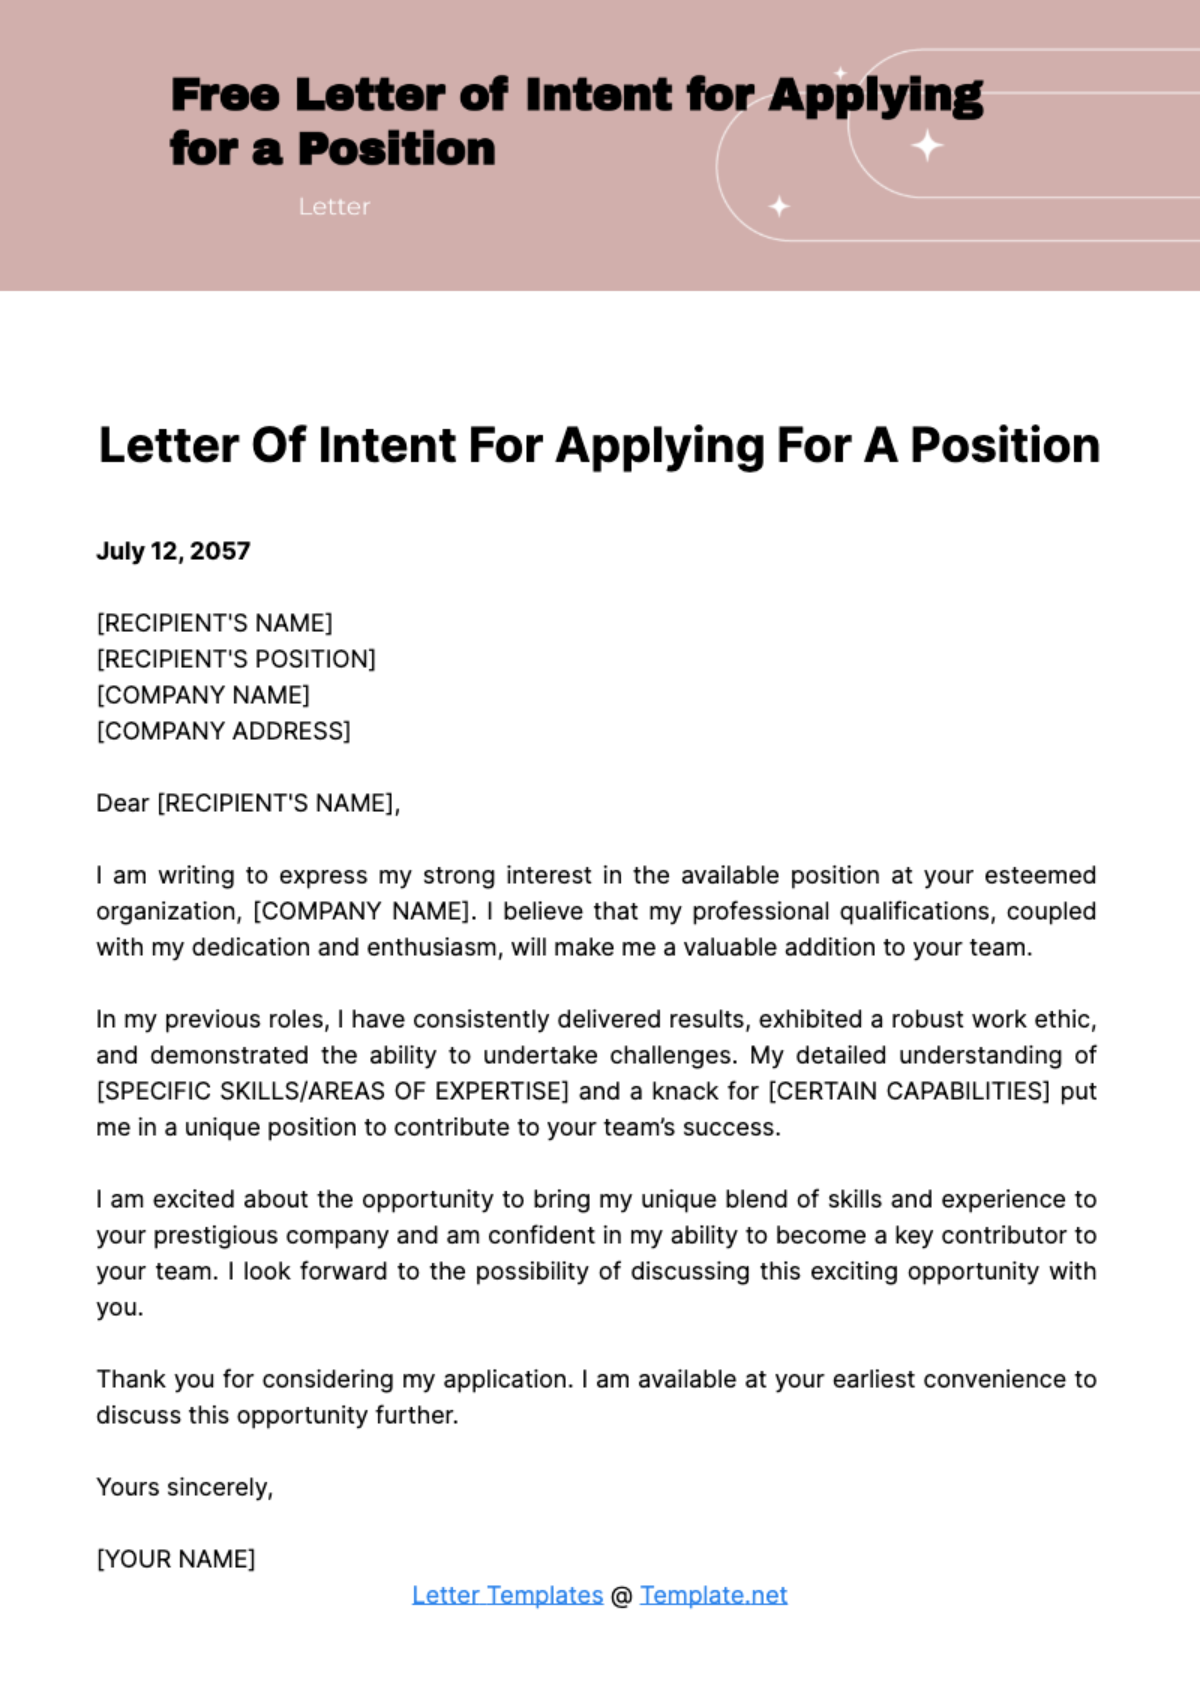 Letter of Intent for Applying for a Position Template